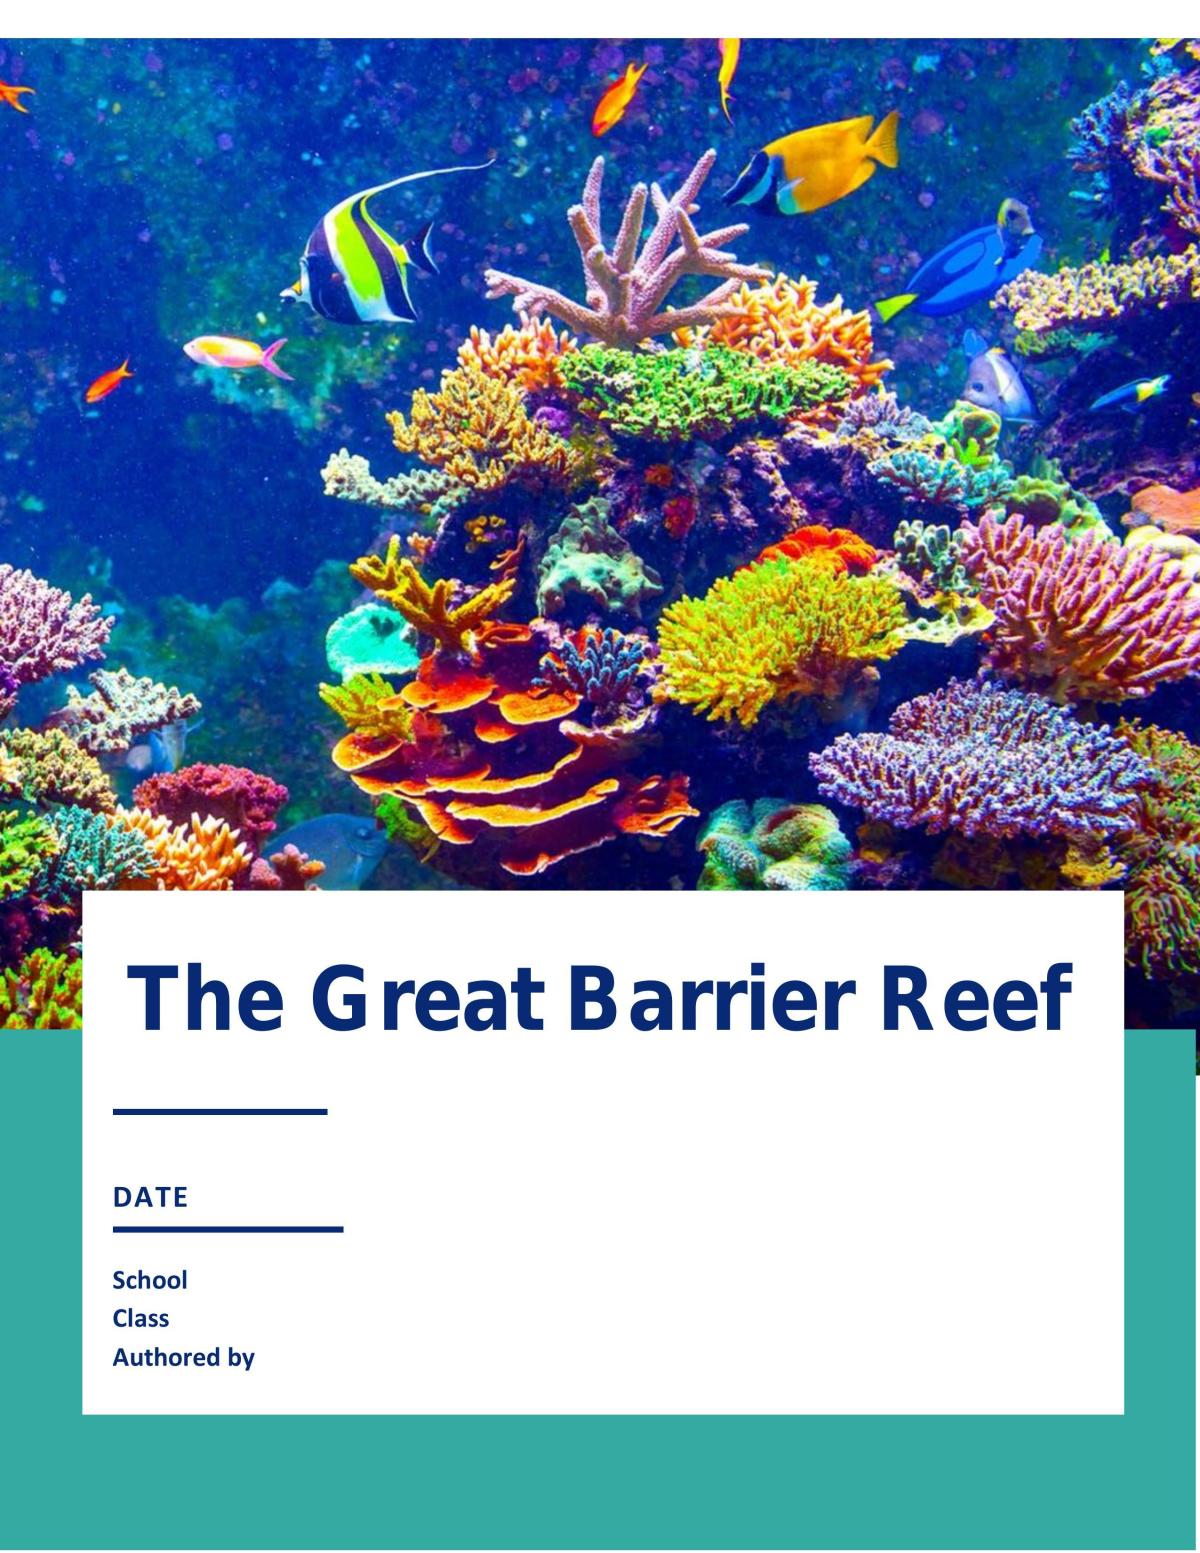 research questions about the great barrier reef